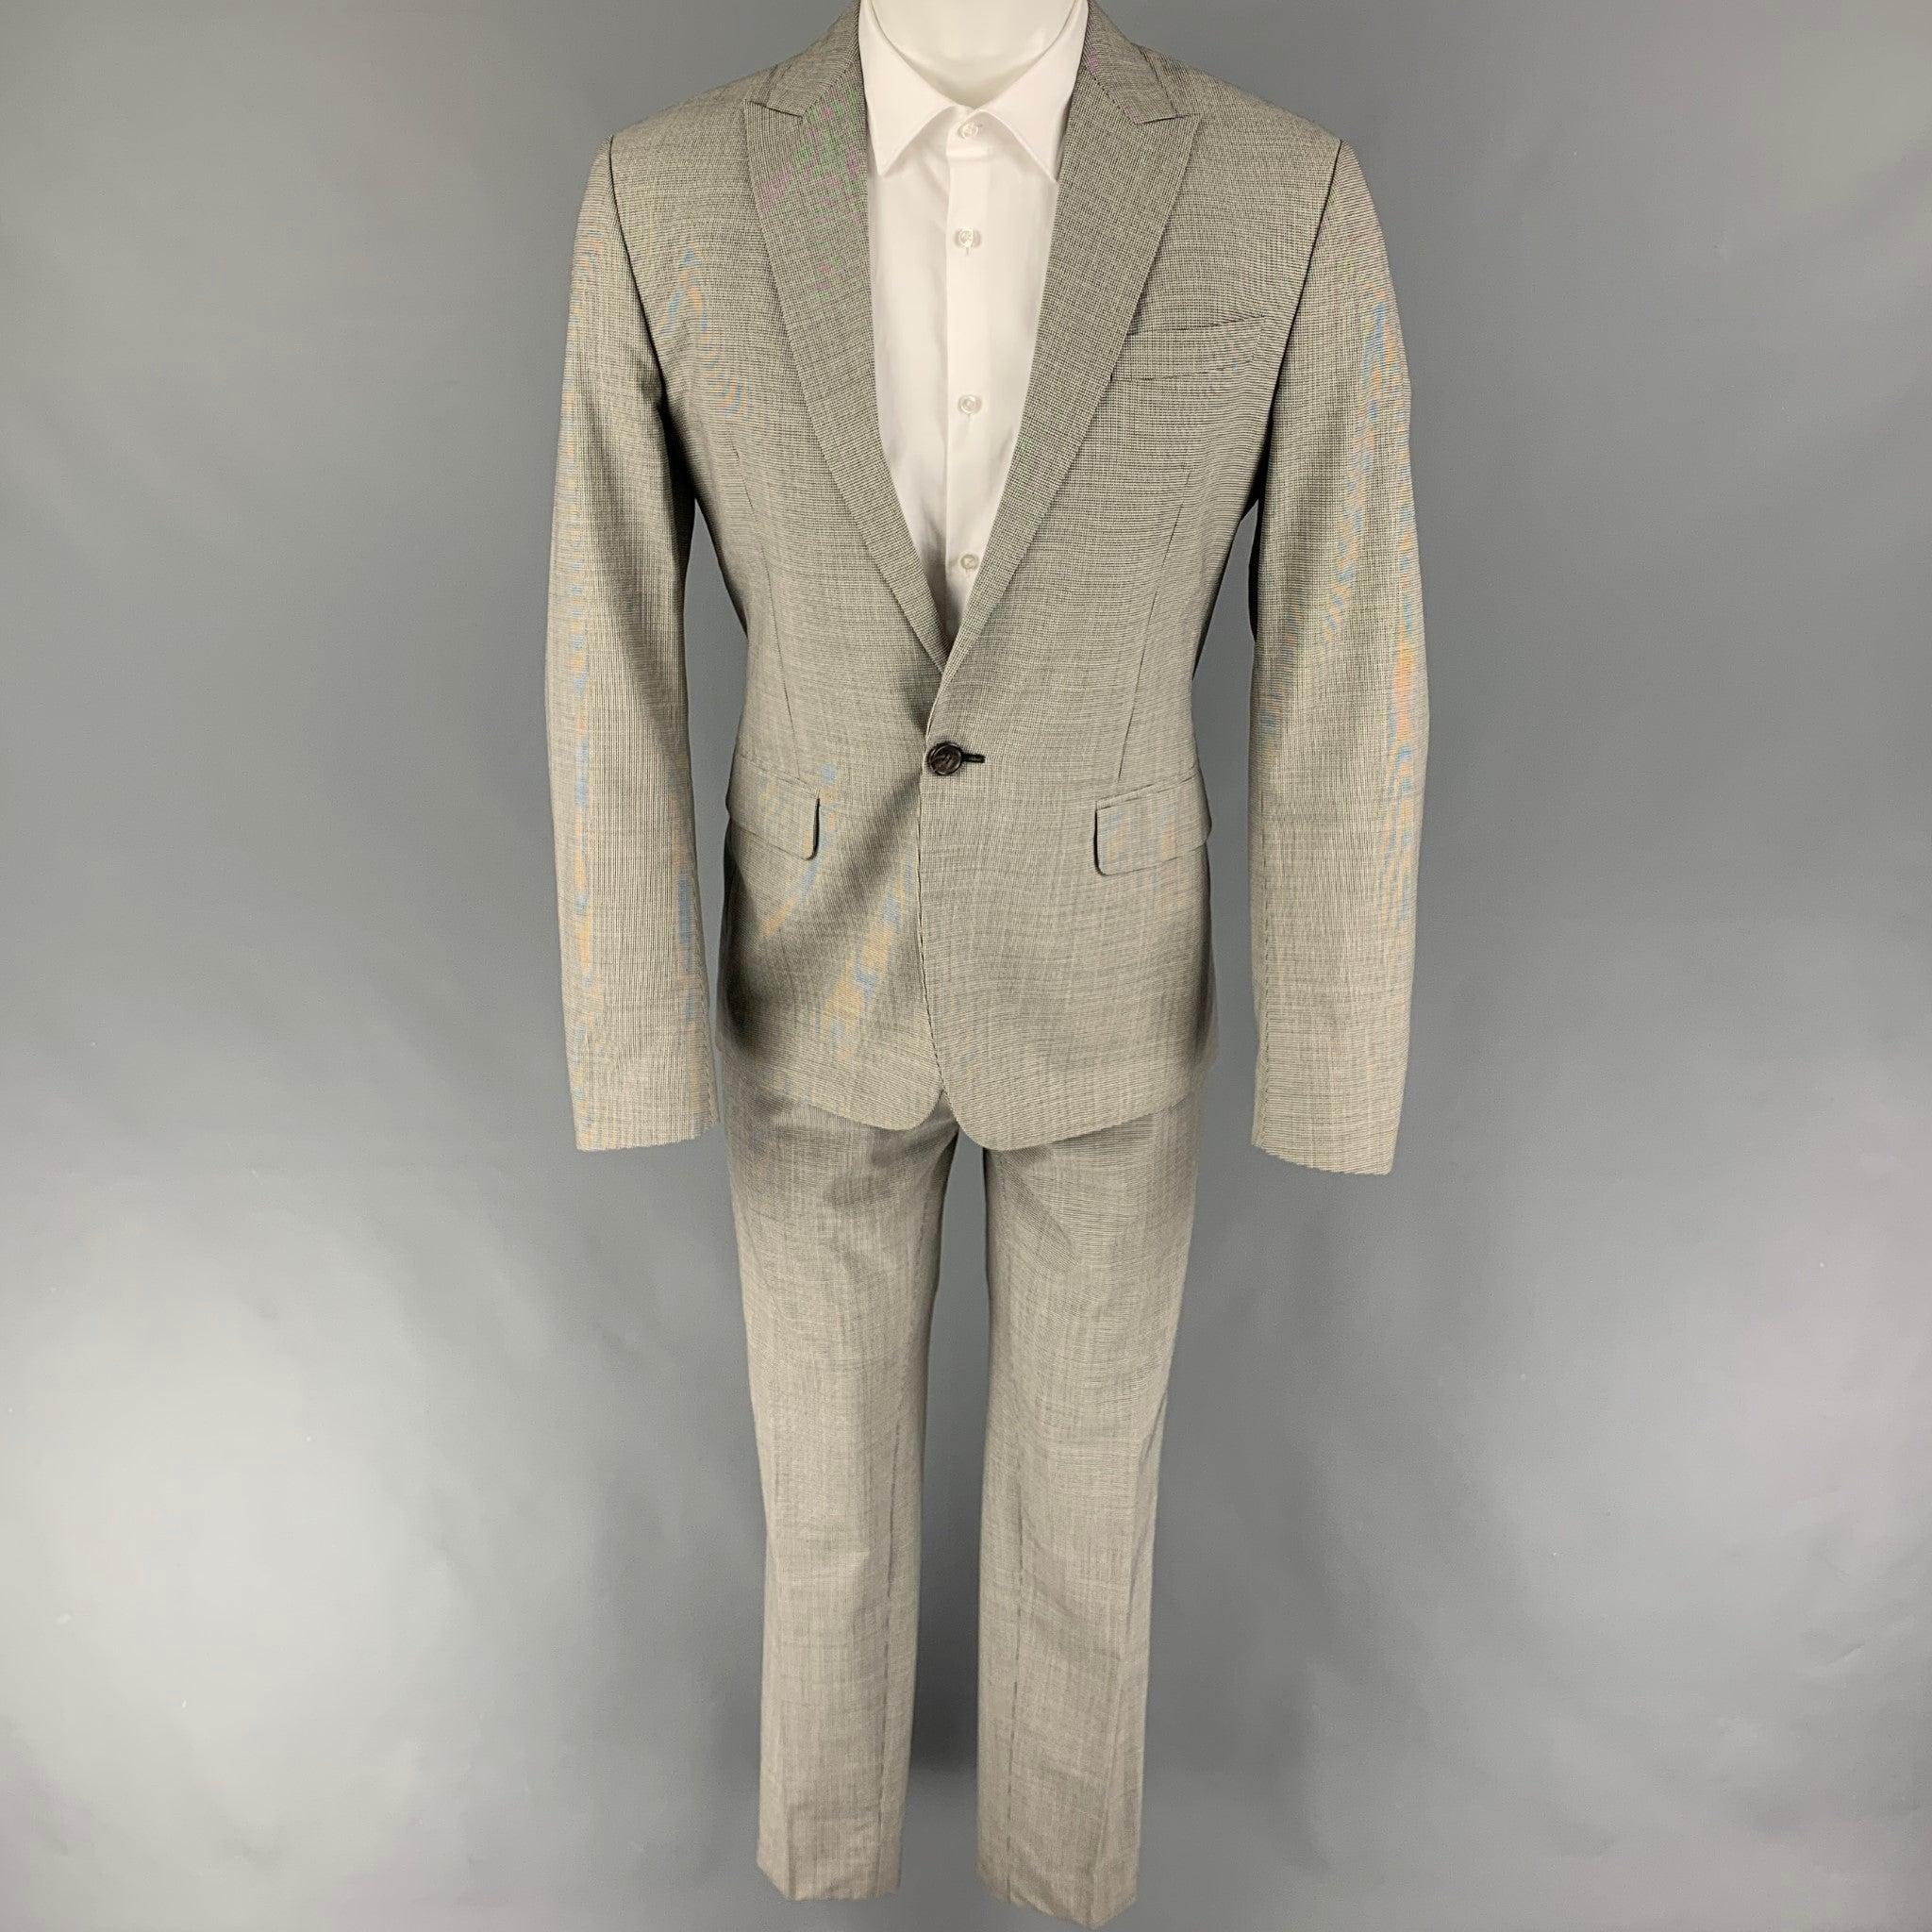 DSQUARED2
suit comes in a black & white houndstooth wool with a full liner and includes a single breasted, single button sport coat with a peak lapel and matching flat front trousers. Made in Italy. Very Good Pre-Owned Condition. 

Marked:   50